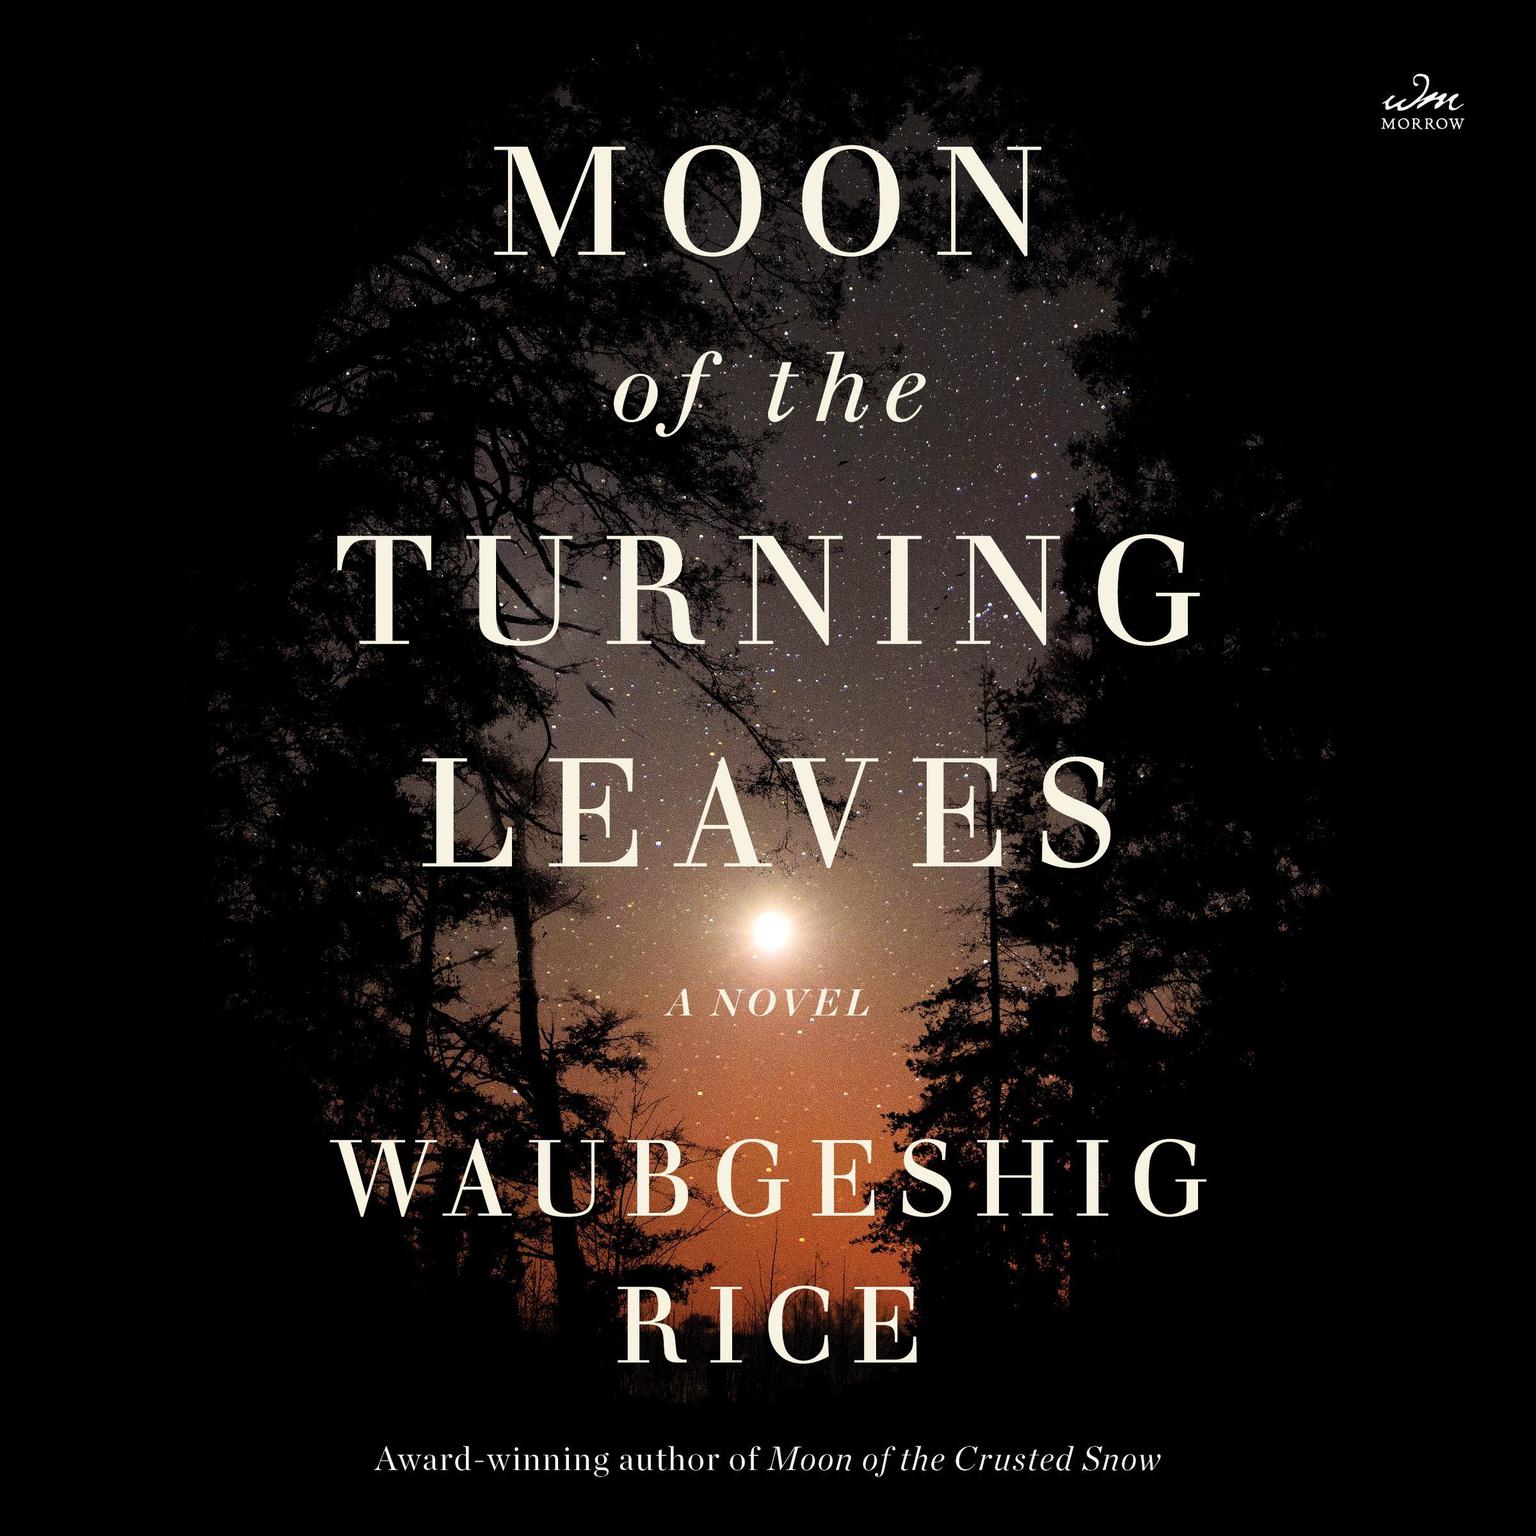 Moon of the Turning Leaves Audiobook, by Waubgeshig Rice